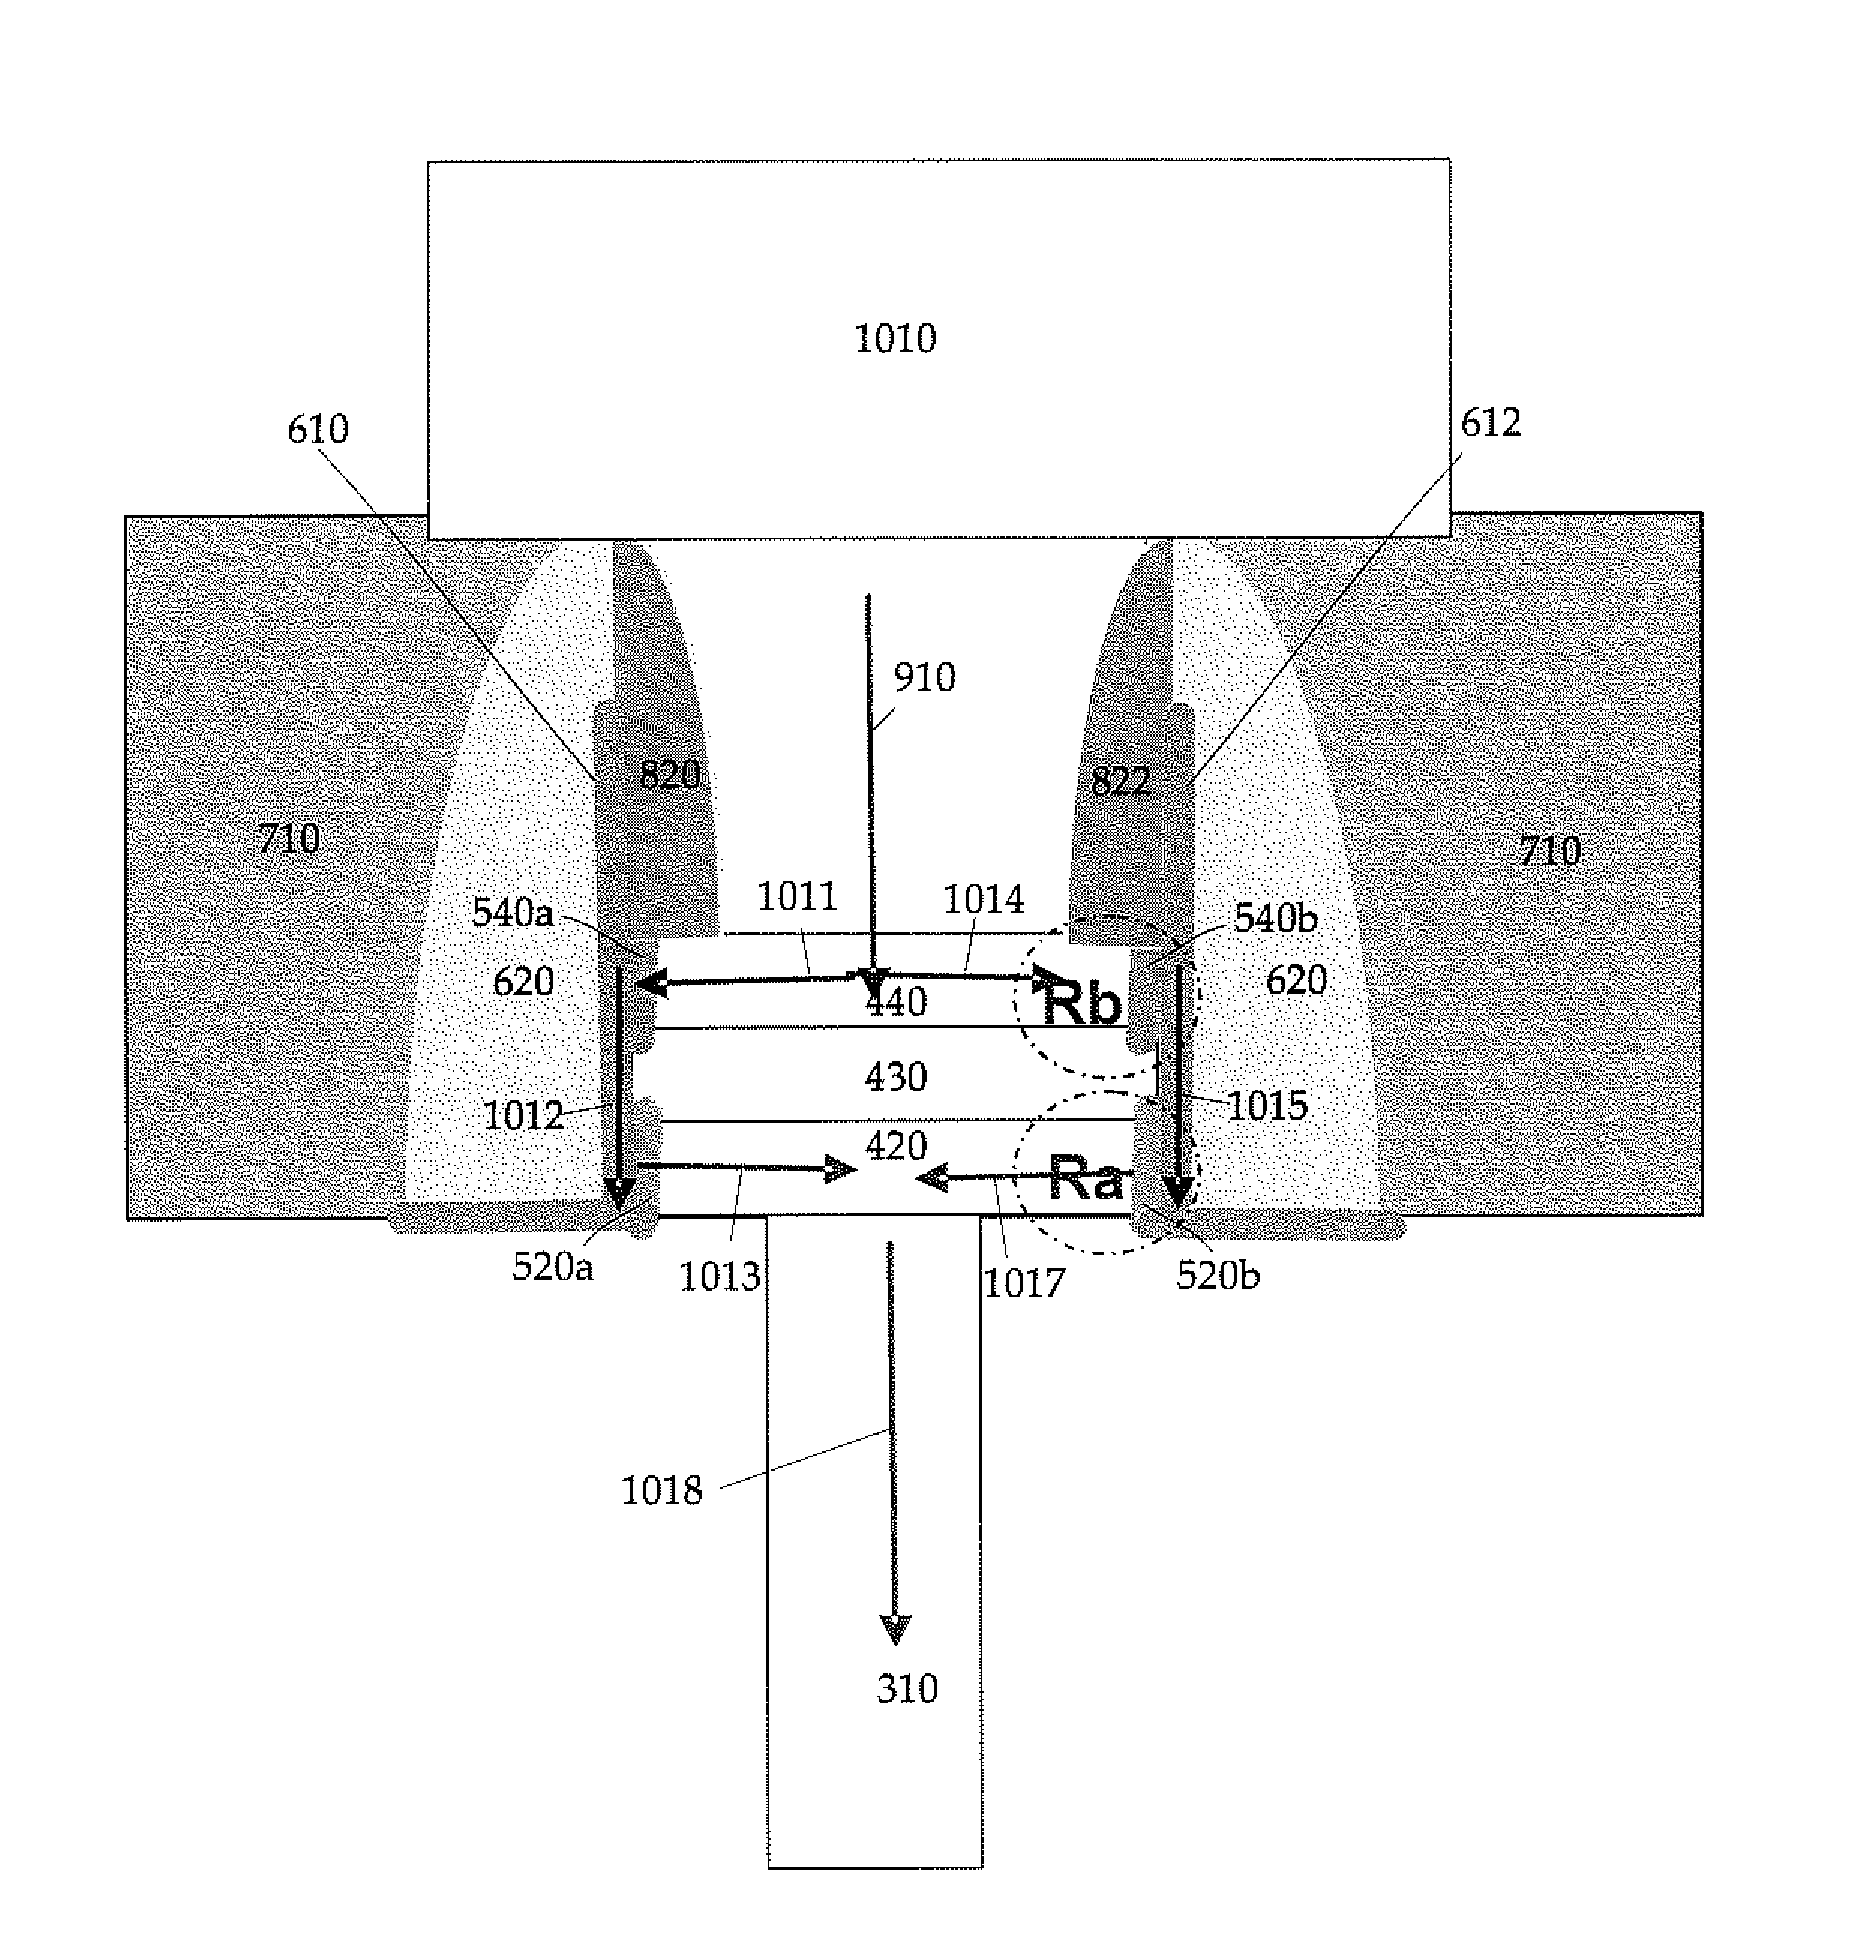 Multi-level cell resistance random access memory with metal oxides